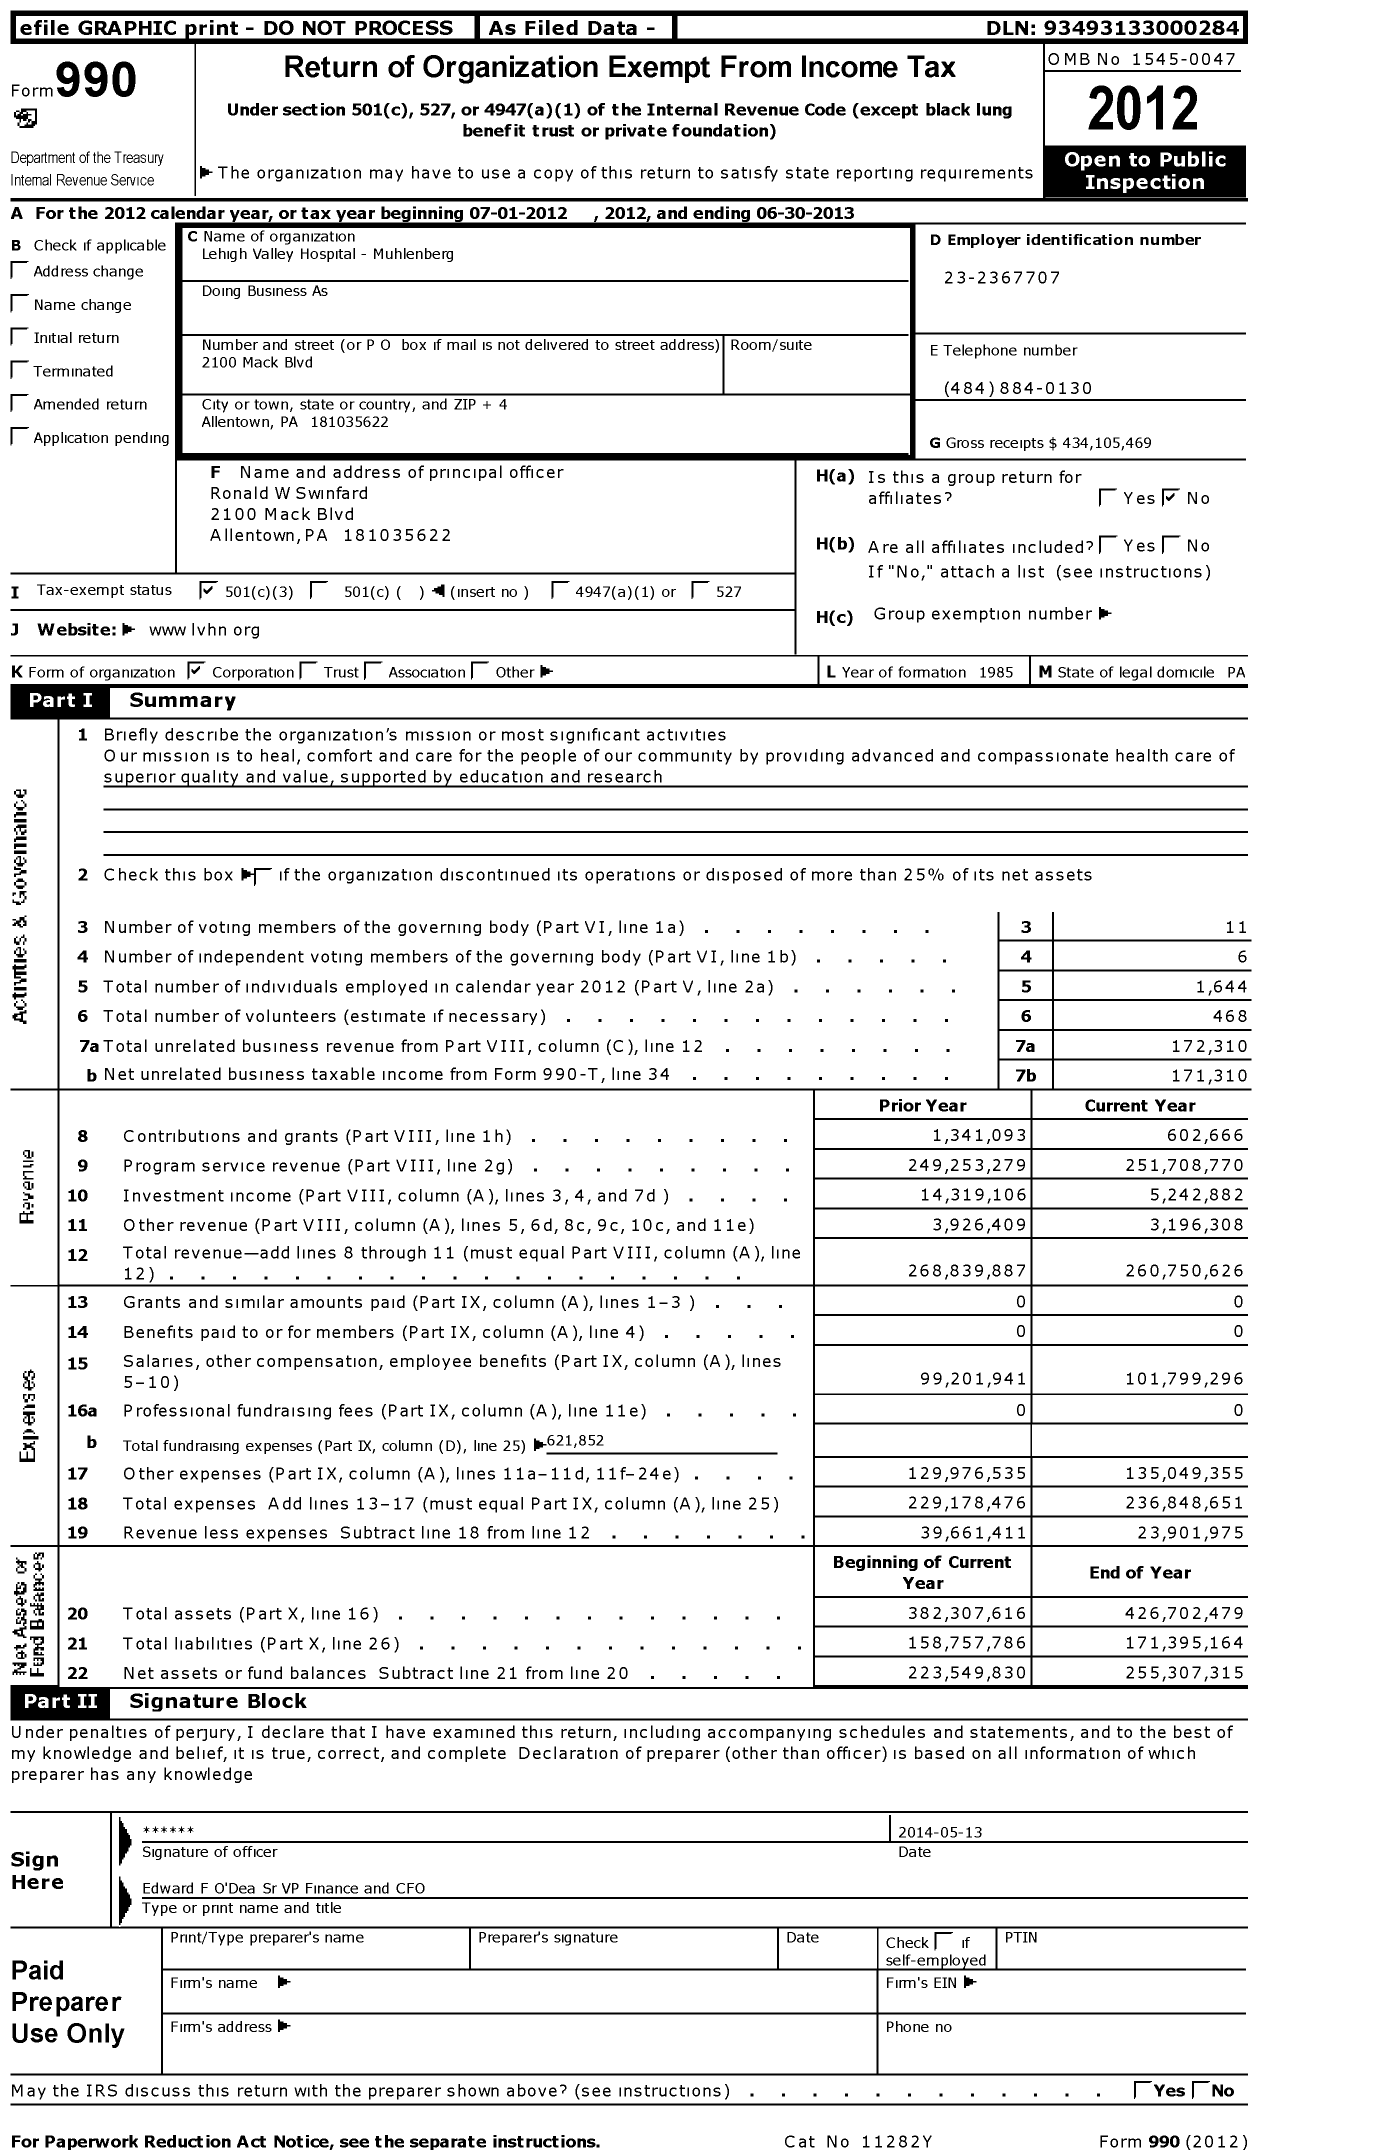 Image of first page of 2012 Form 990 for Lehigh Valley Hospital-Muhlenberg